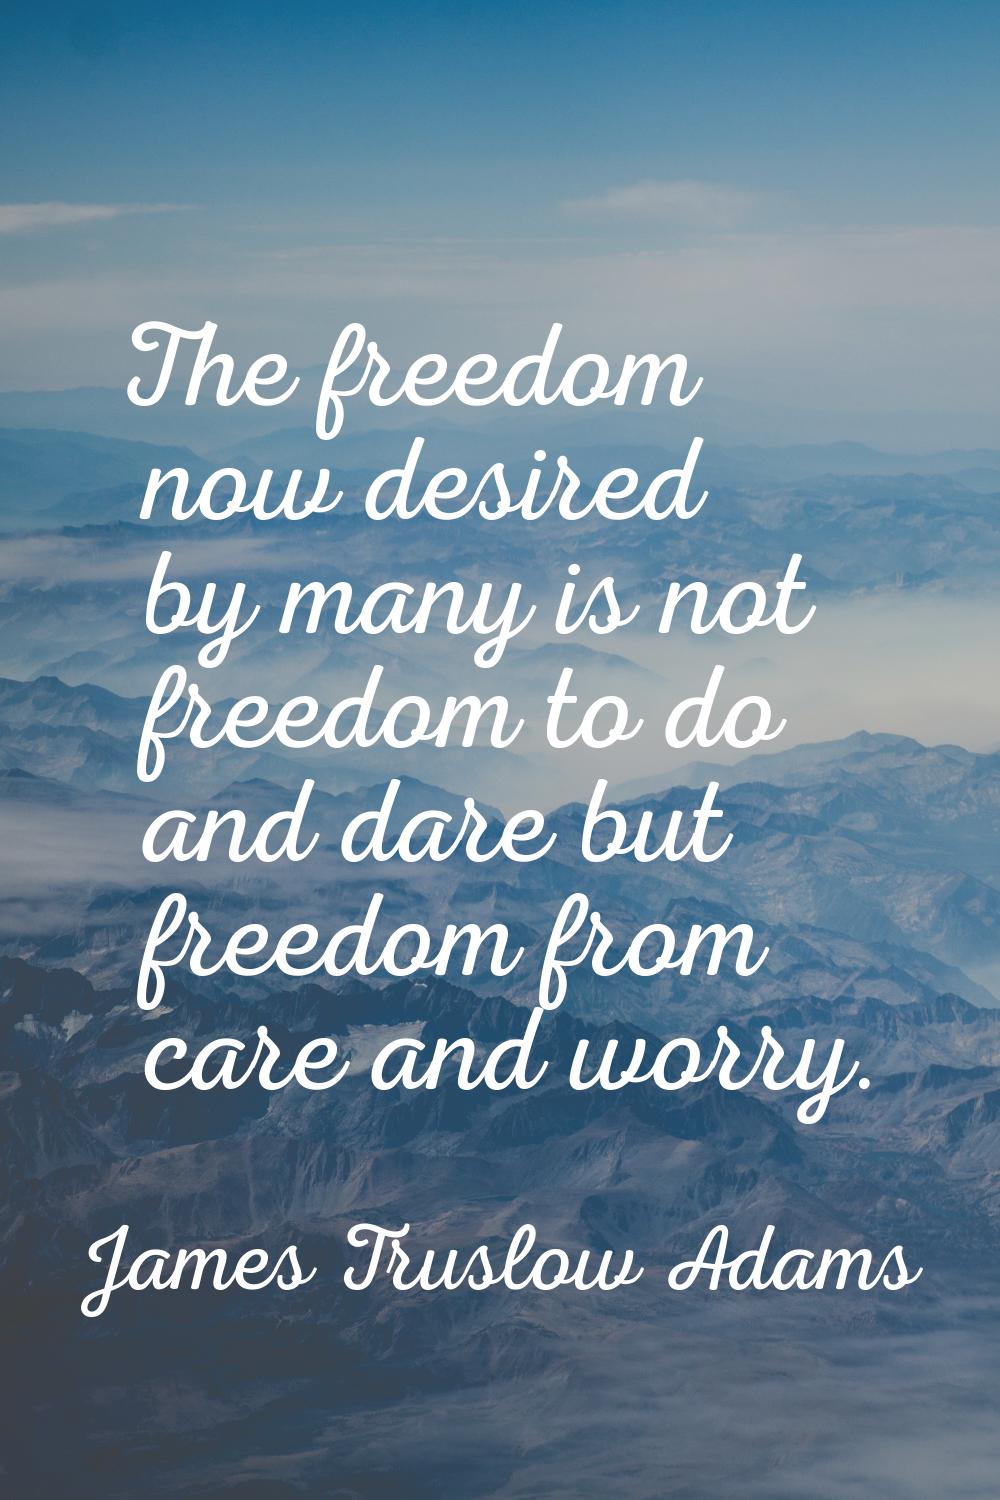 The freedom now desired by many is not freedom to do and dare but freedom from care and worry.